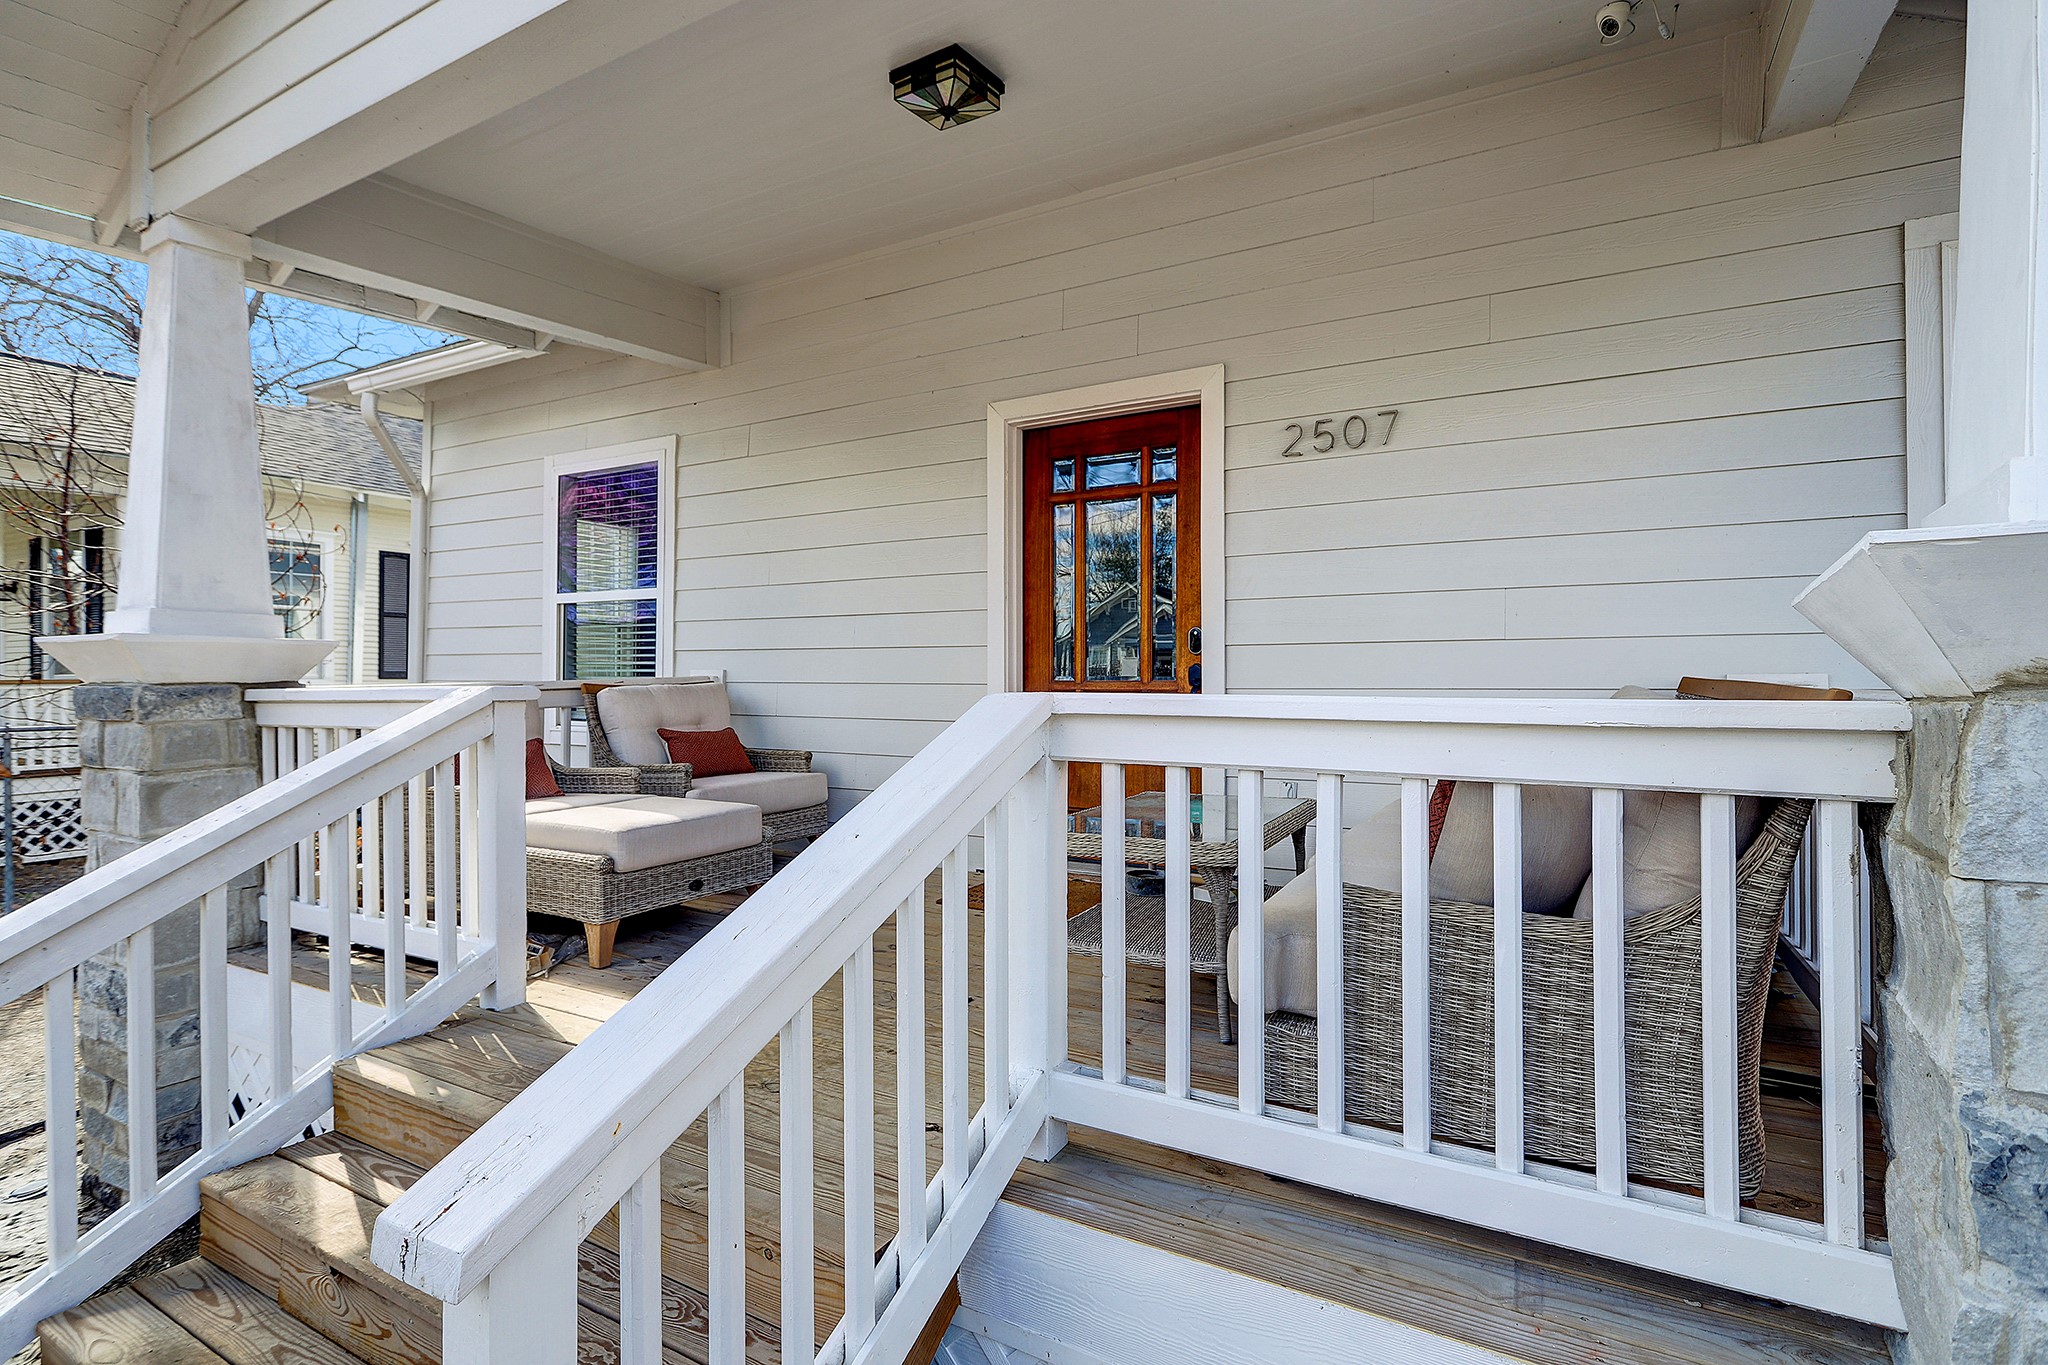 The large porch is just betting for you to enjoy your afternoons on a sunny crisp day!